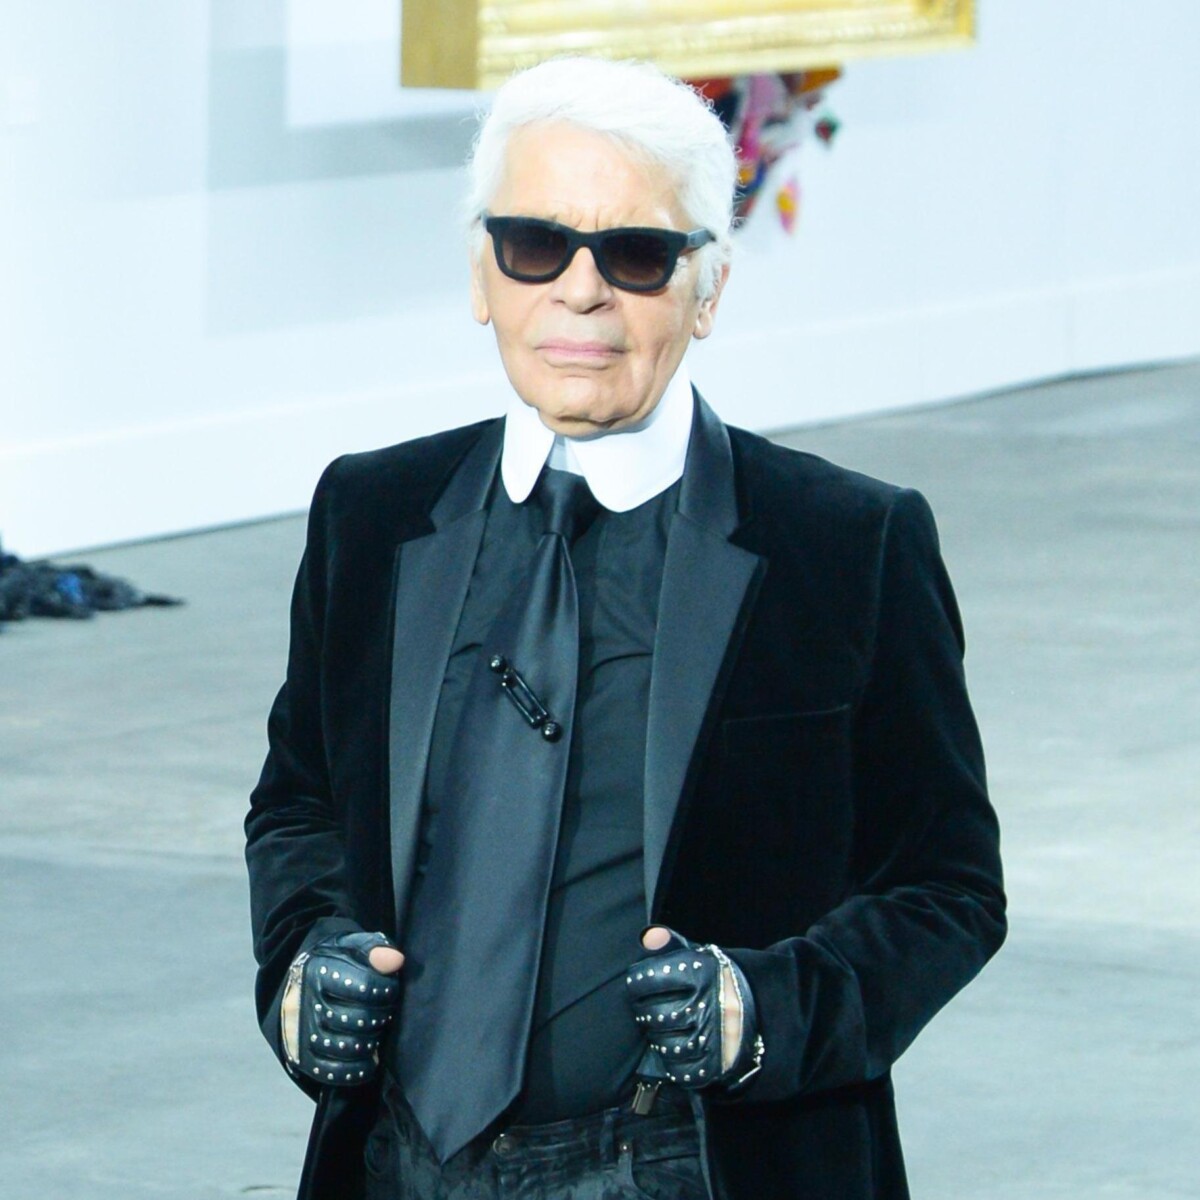 Karl Lagerfeld is the Subject of The Met's Next Major Fashion Exhibition